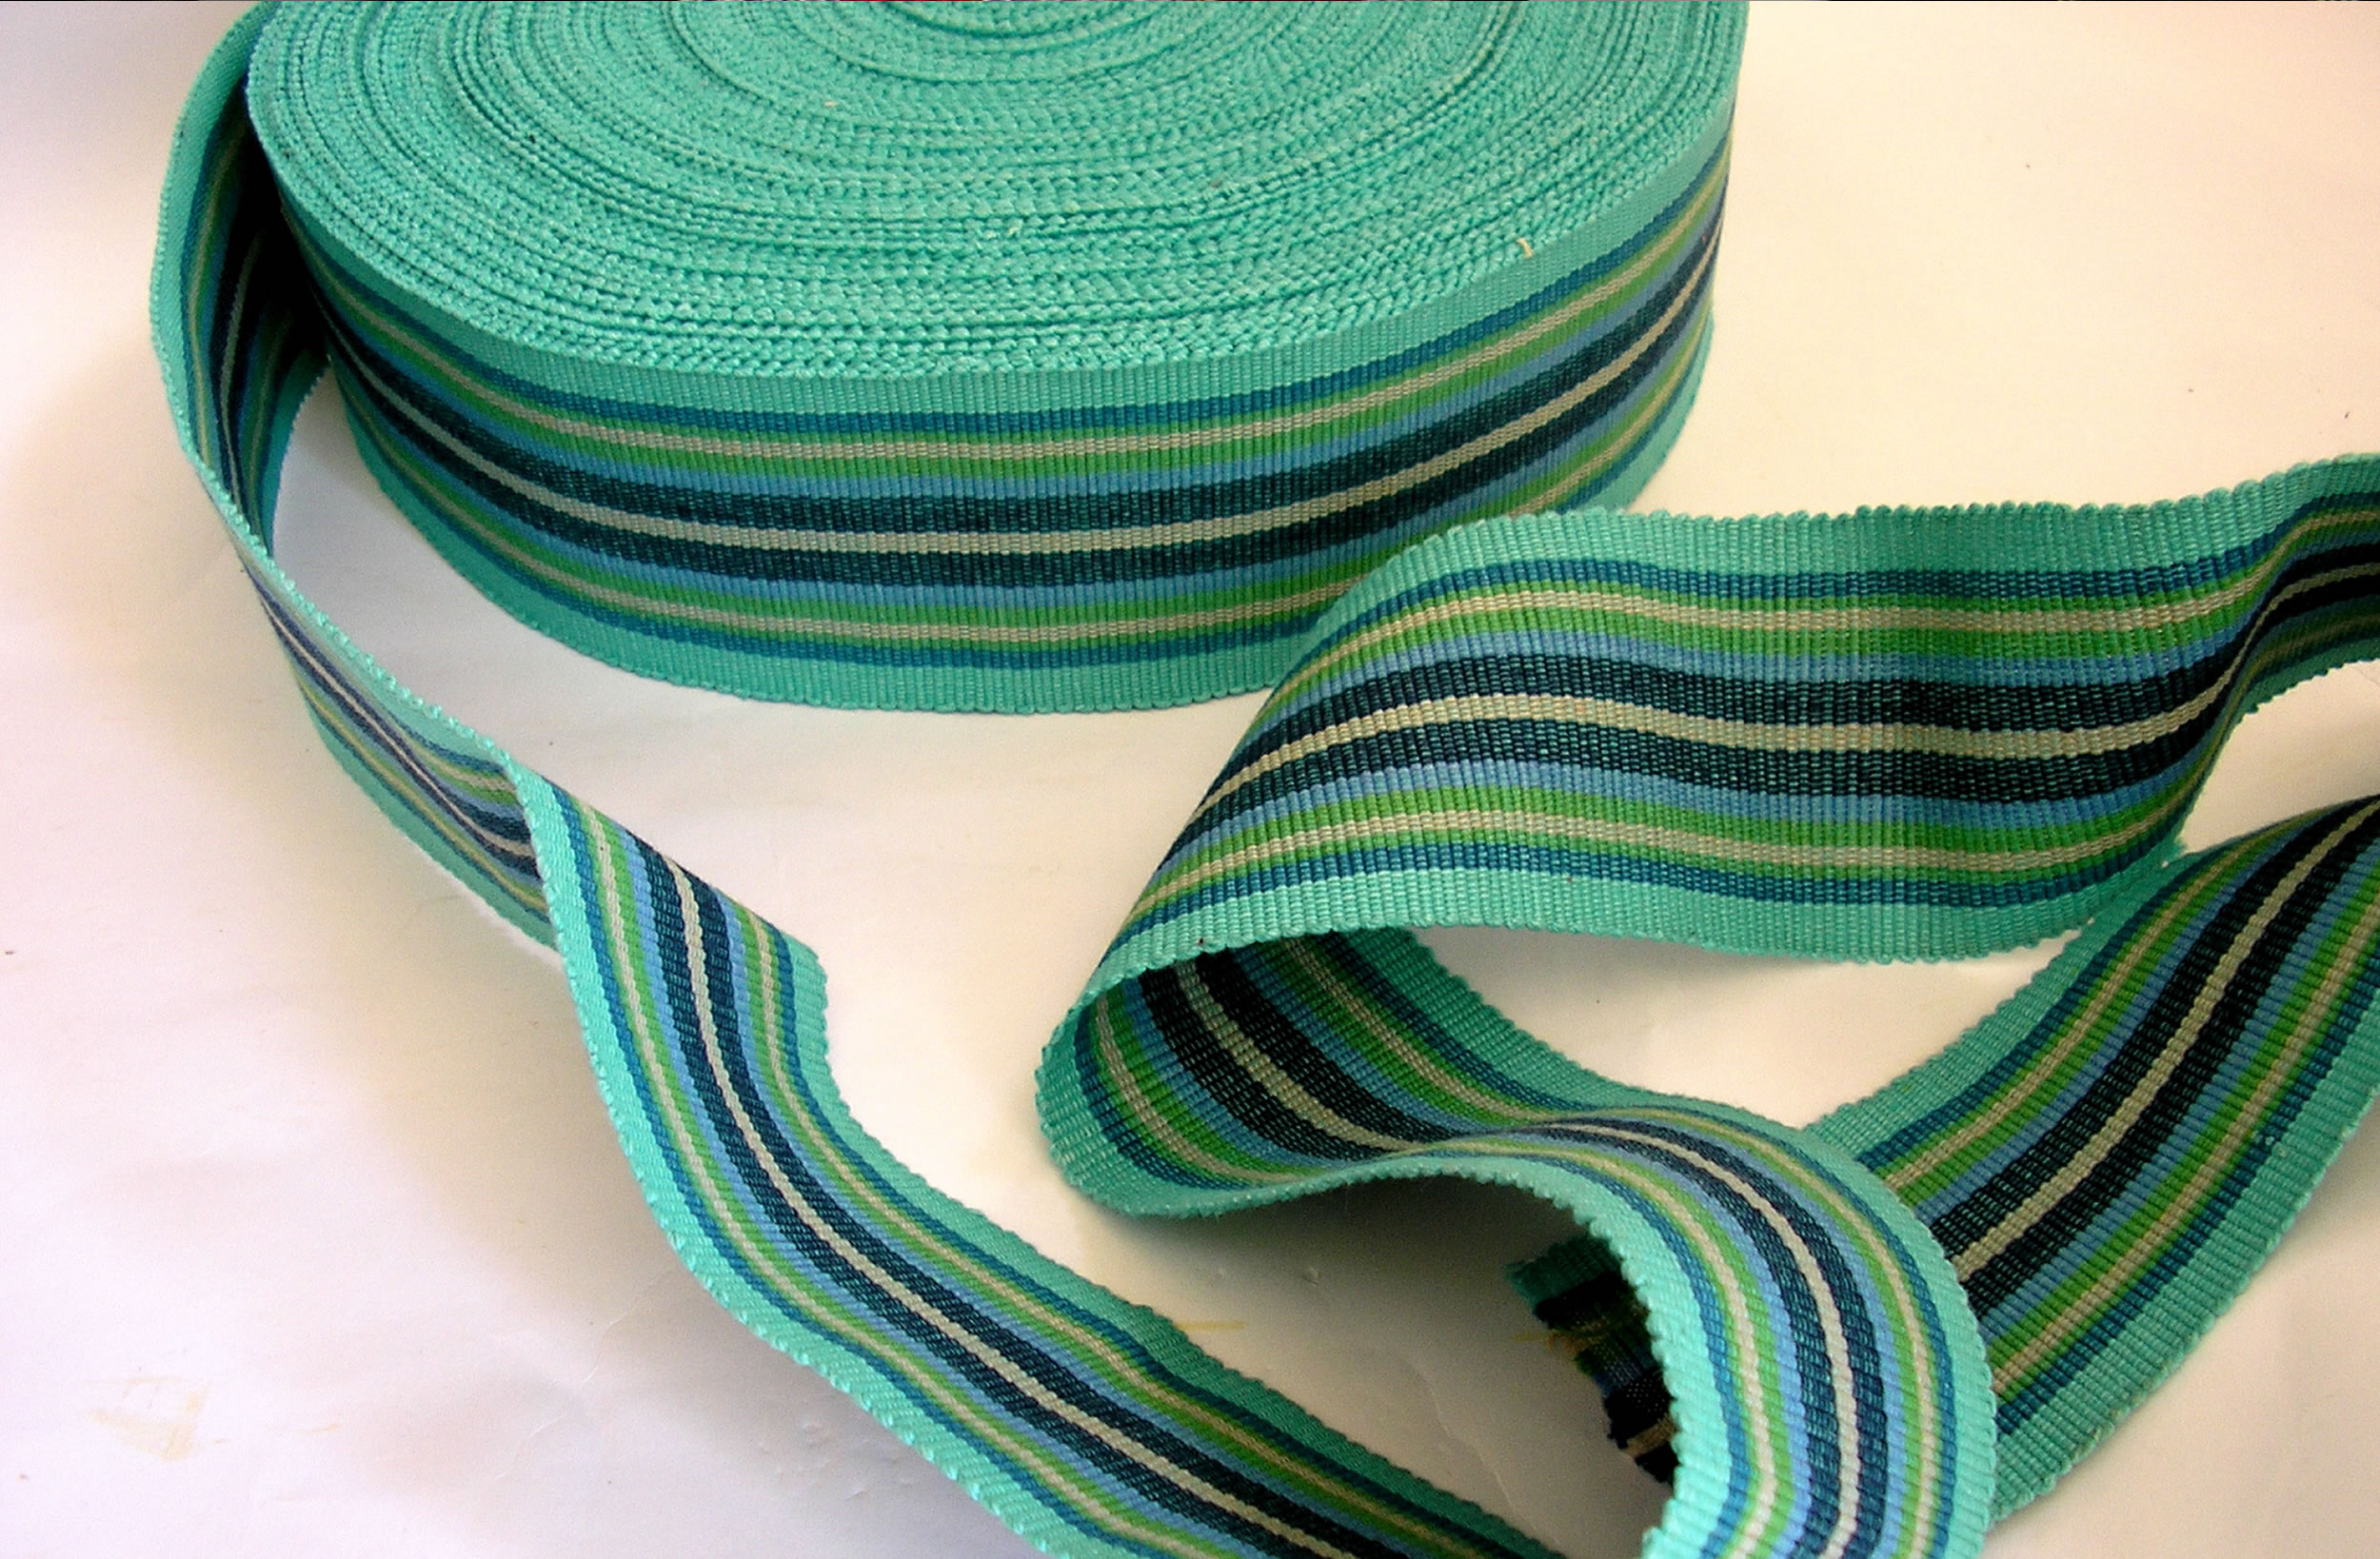 Turquoise, Blue, Green Striped Webbing | Upholstery Webbing Fencing Stripes